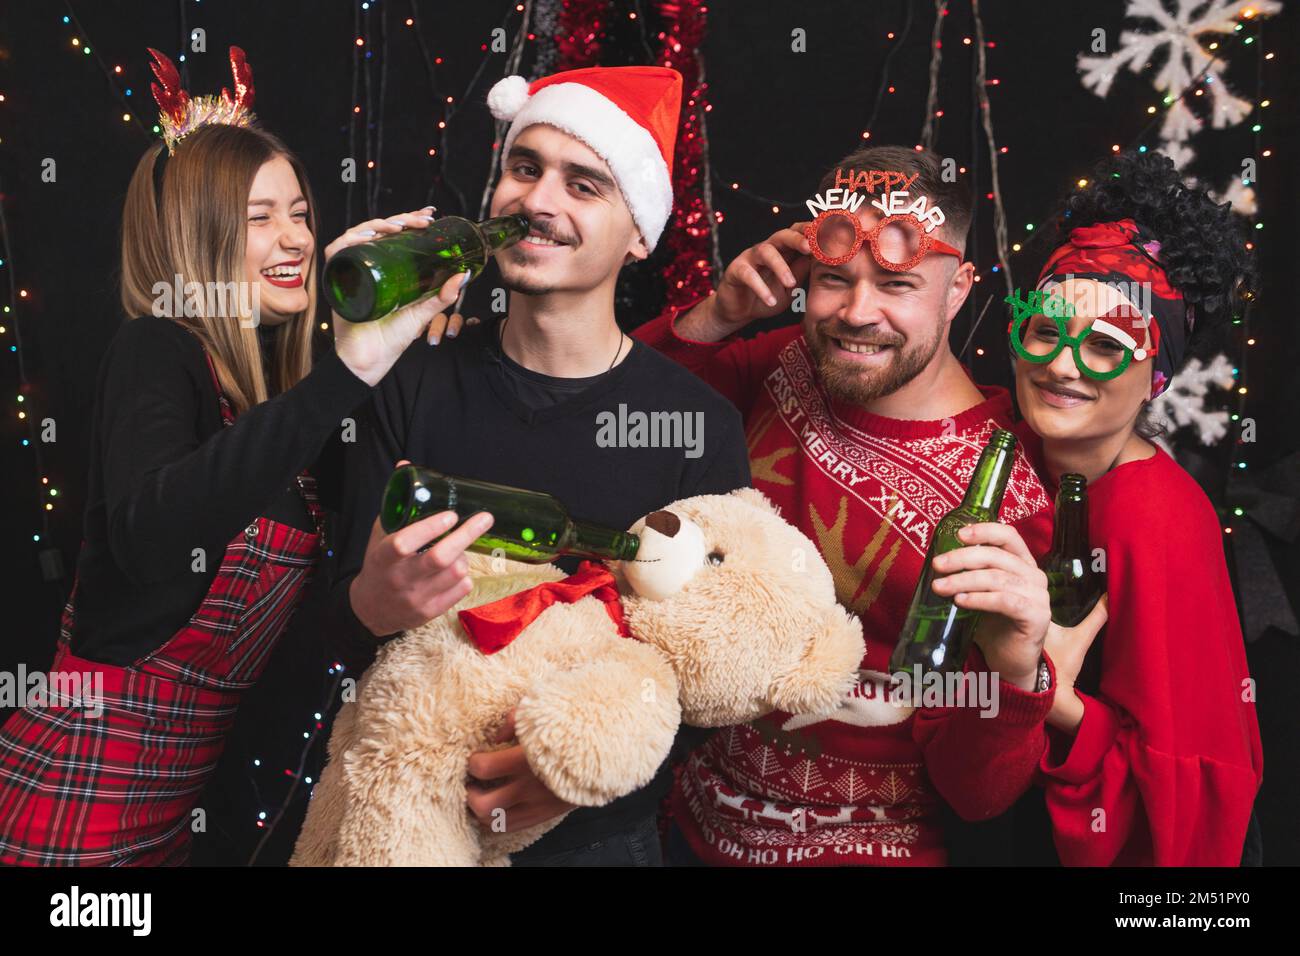 Four friends celebrating New year toasting with beer bottles. Stock Photo